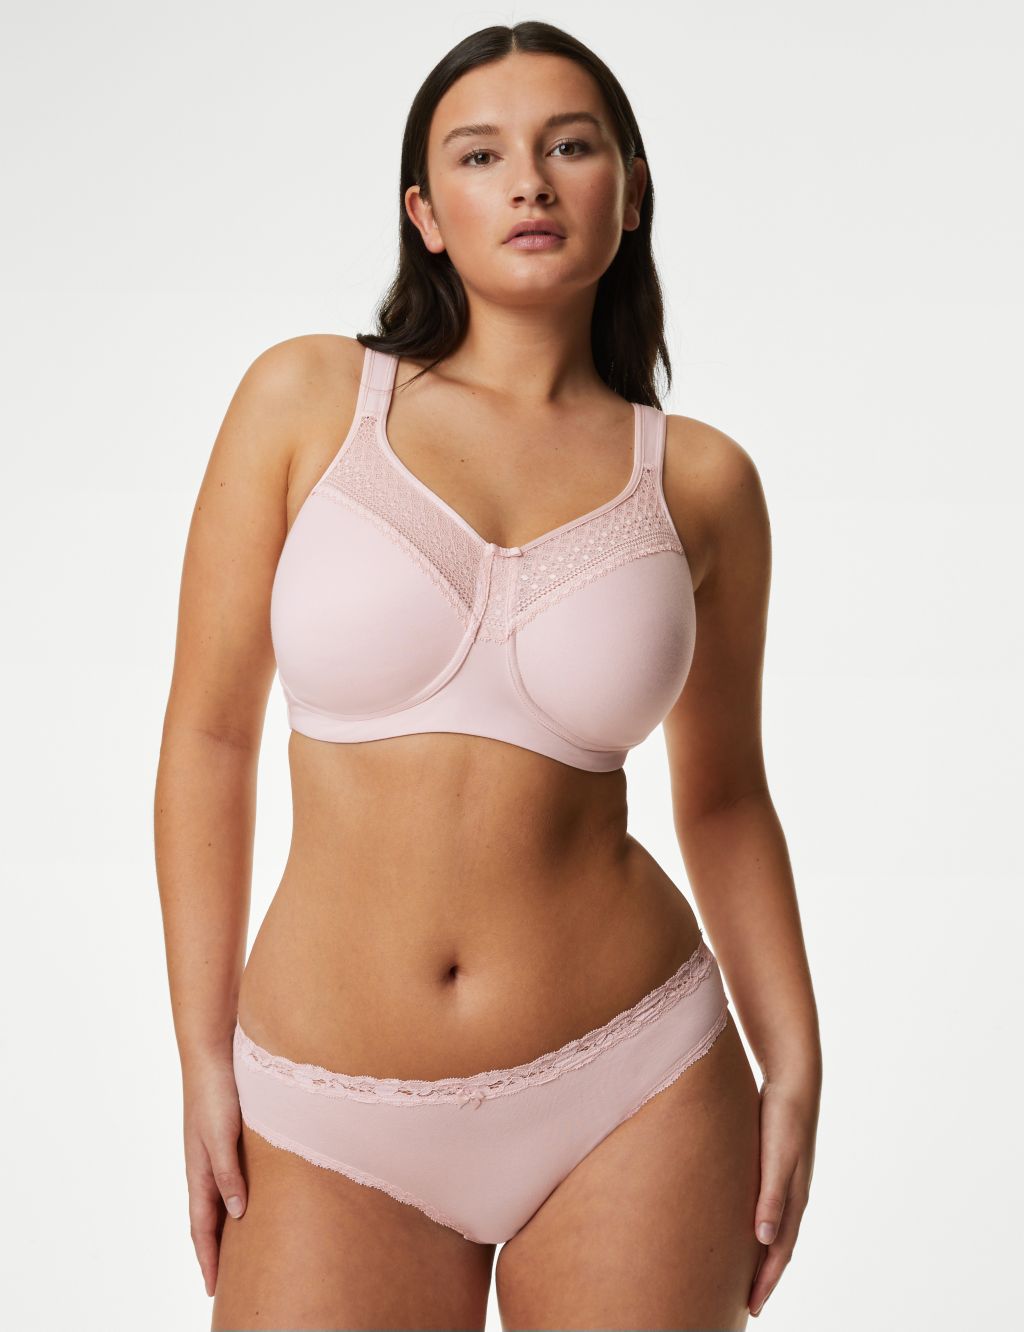 Cotton Blend & Lace Non Wired Total Support Bra Set B-H